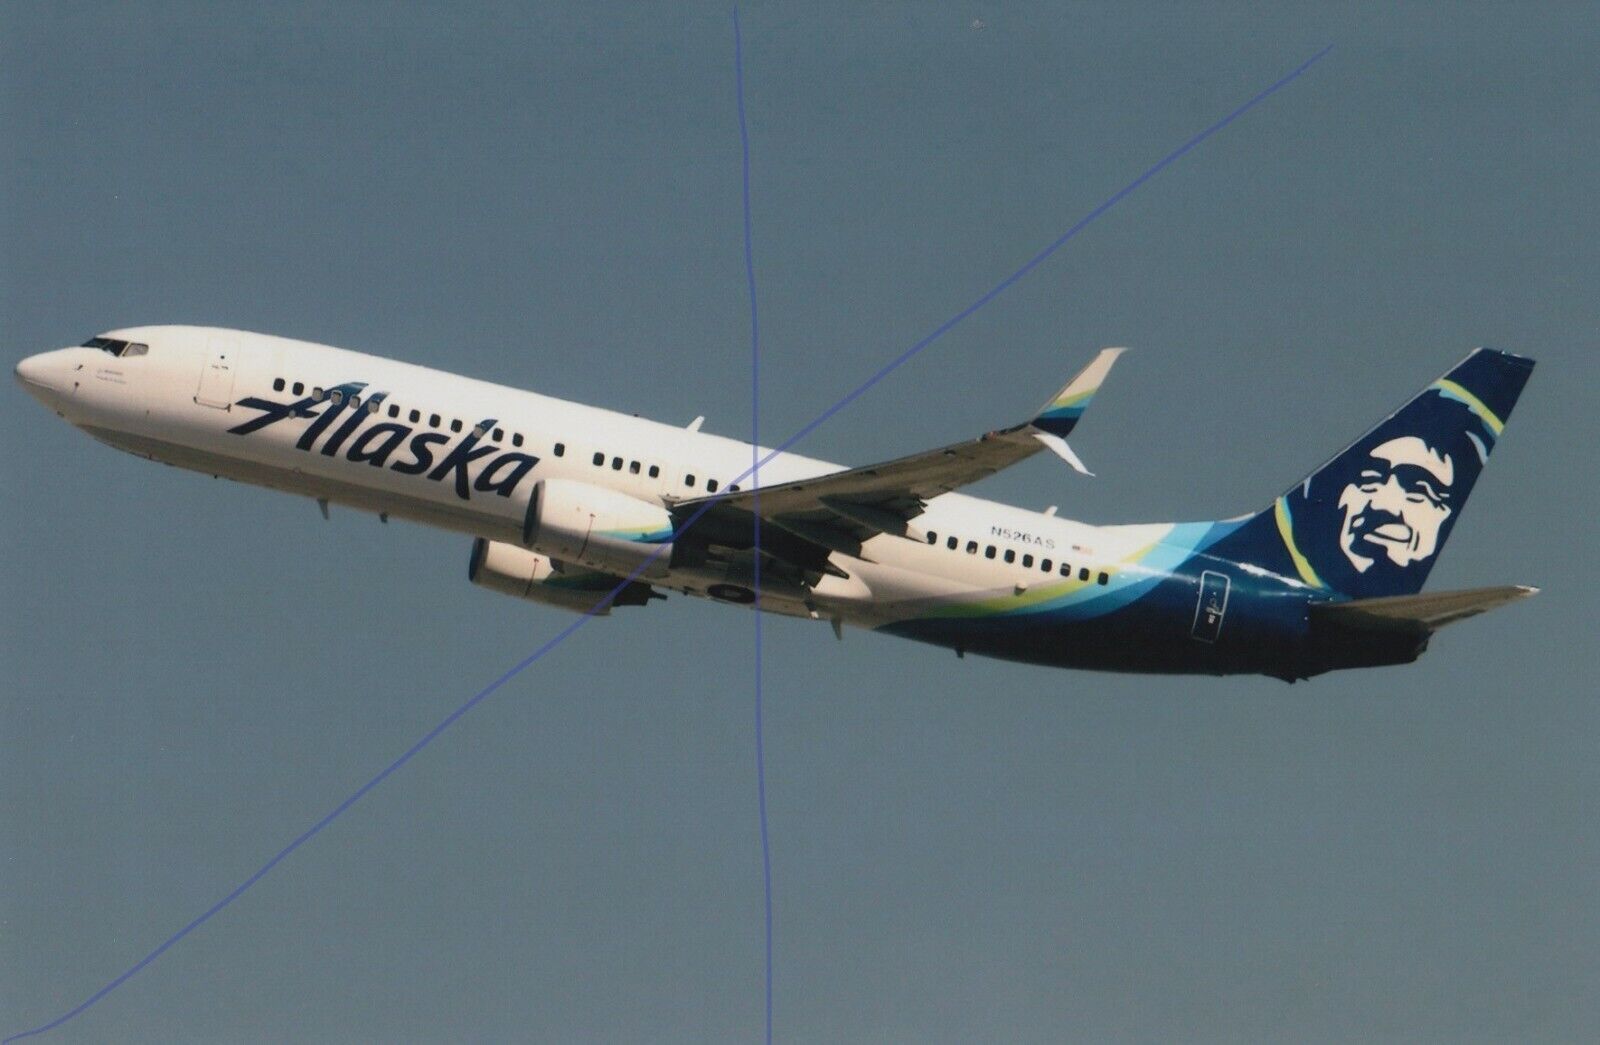 CIVIL AIRCRAFT PLANE PHOTO ALASKA PICTURE PHOTOGRAPH N526AS BOEING 737 AIRLINER.